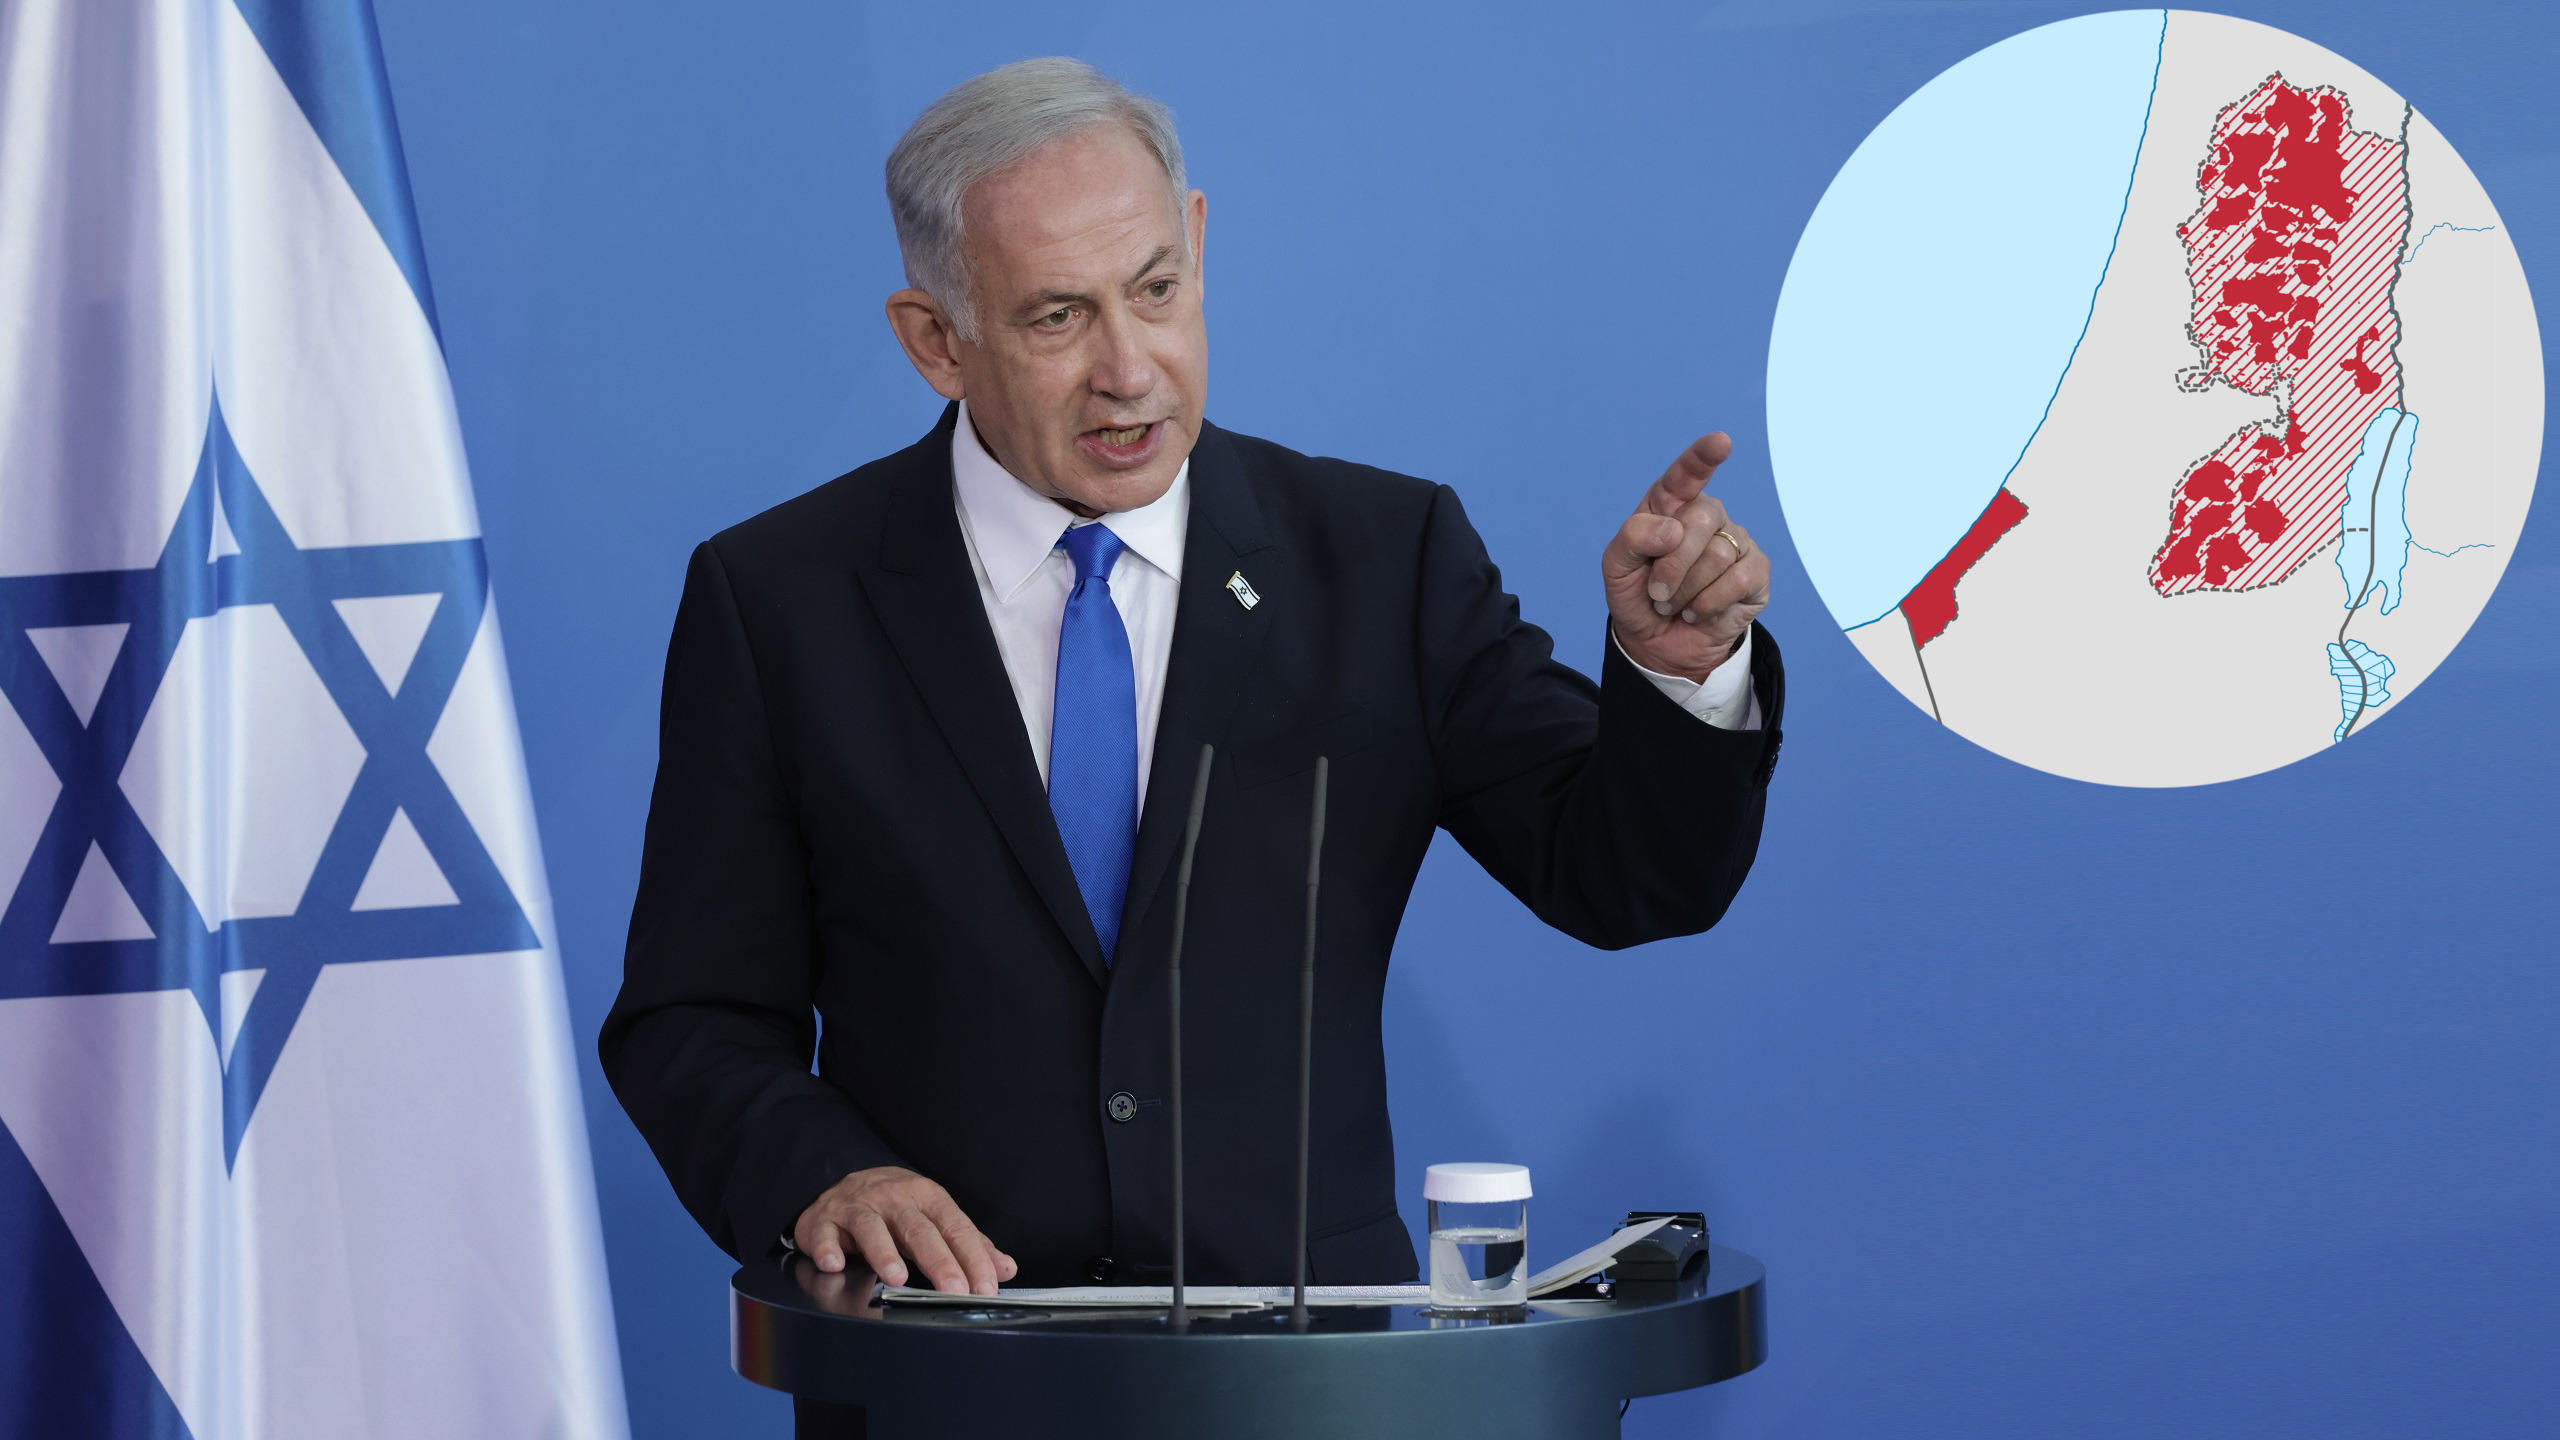 Palestinians Furious Over Netanyahu’s Claim That Israel Must ‘Crush’ Statehood Ambitions